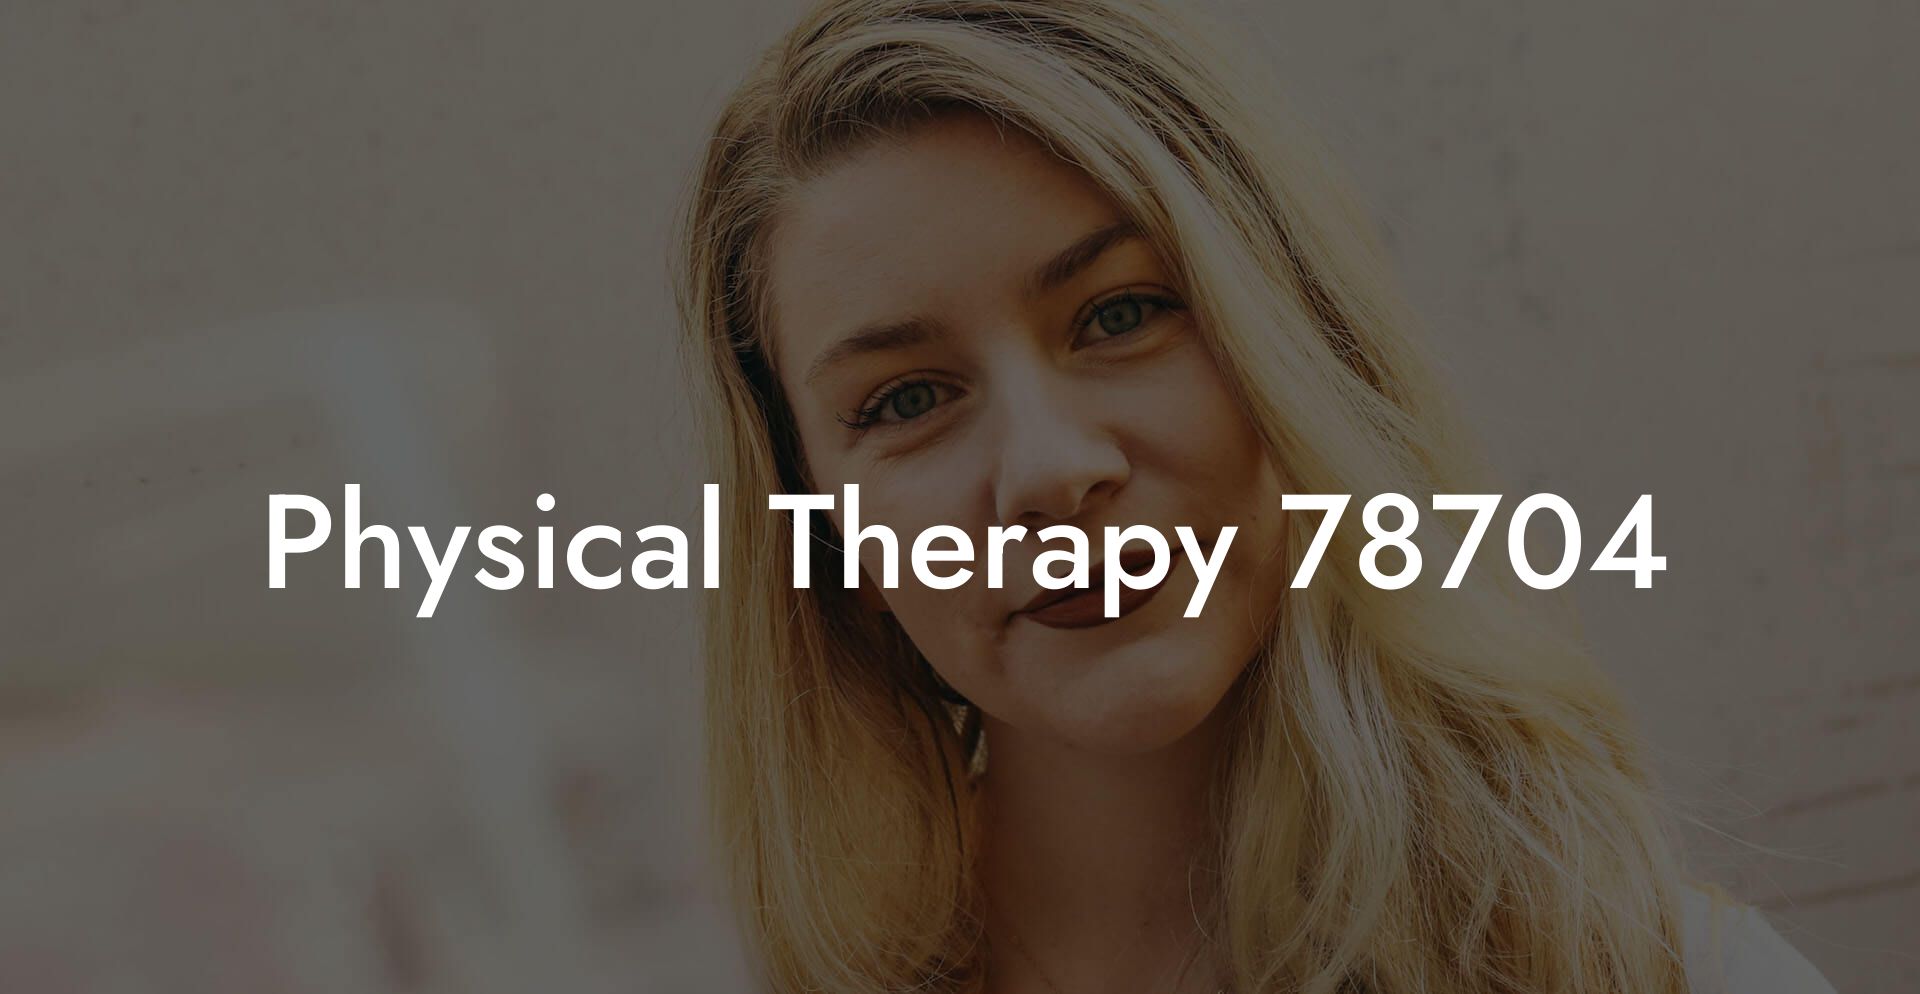 Physical Therapy 78704